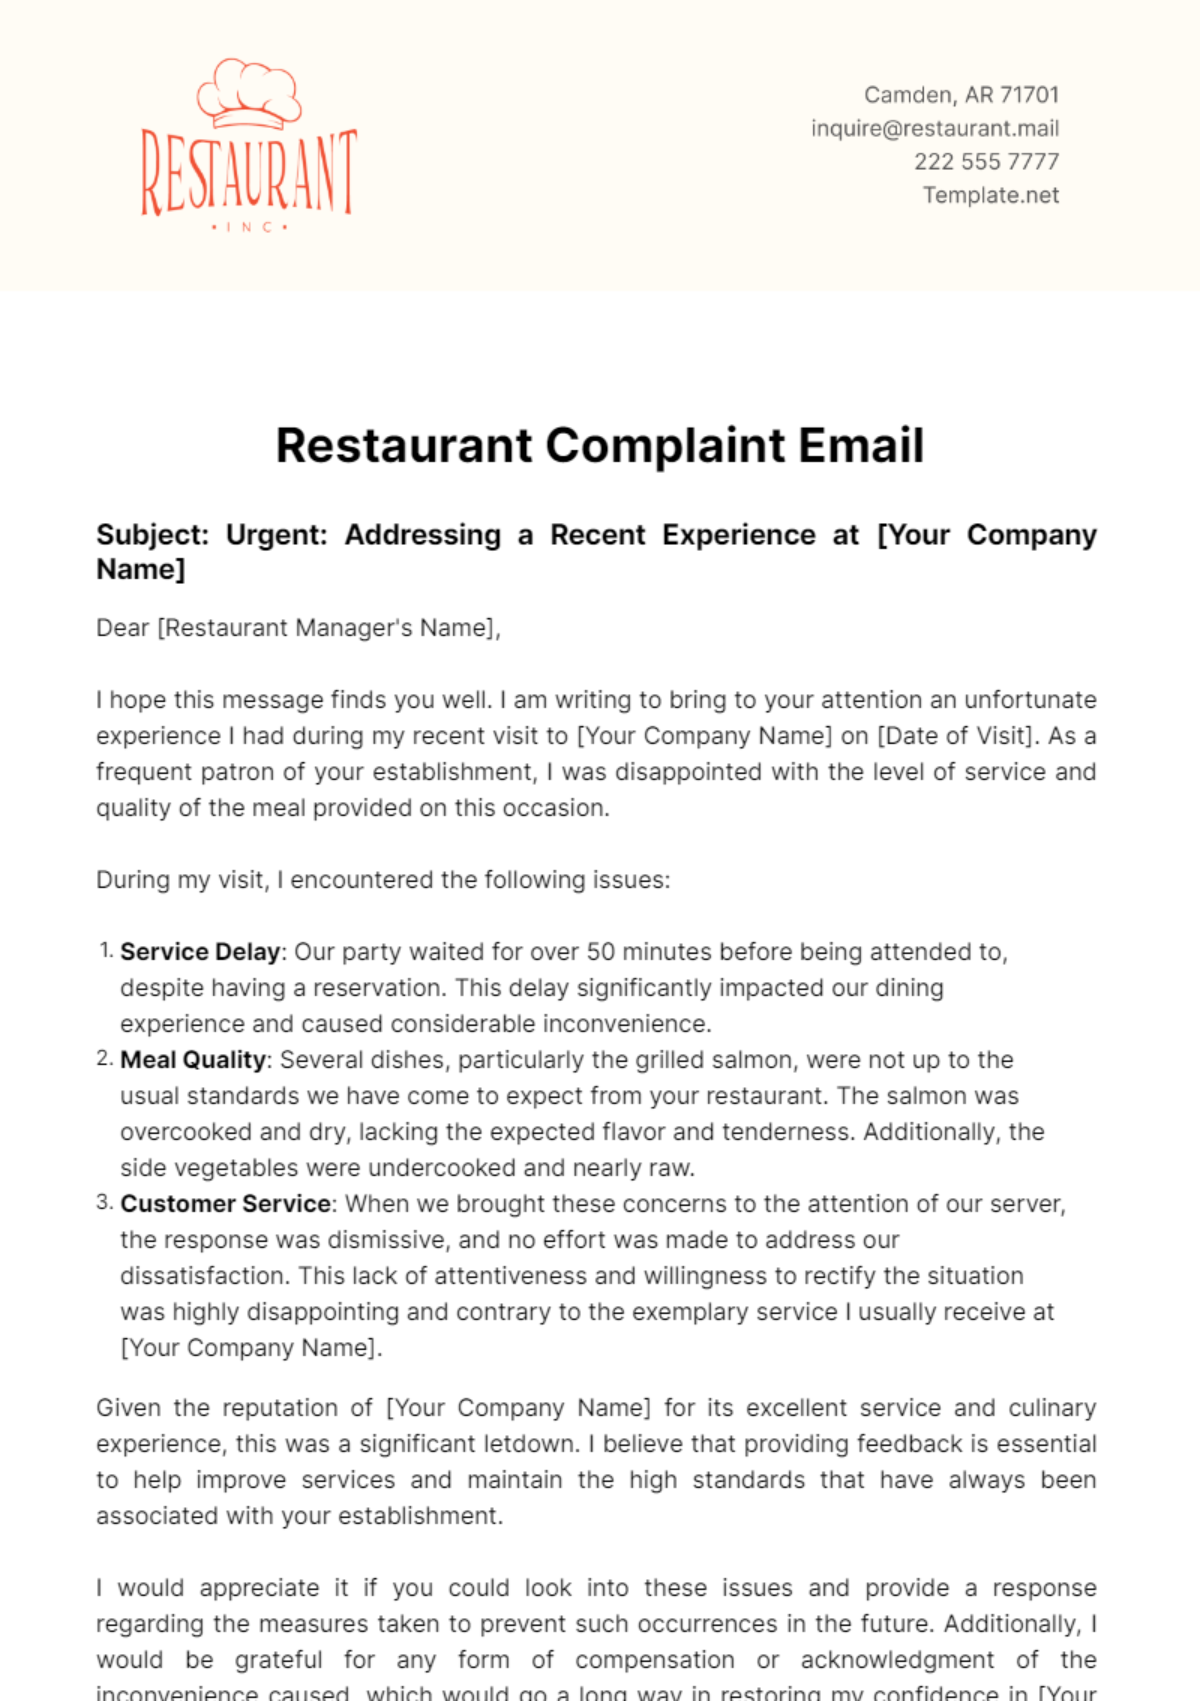 Free Restaurant Complaint Email Template